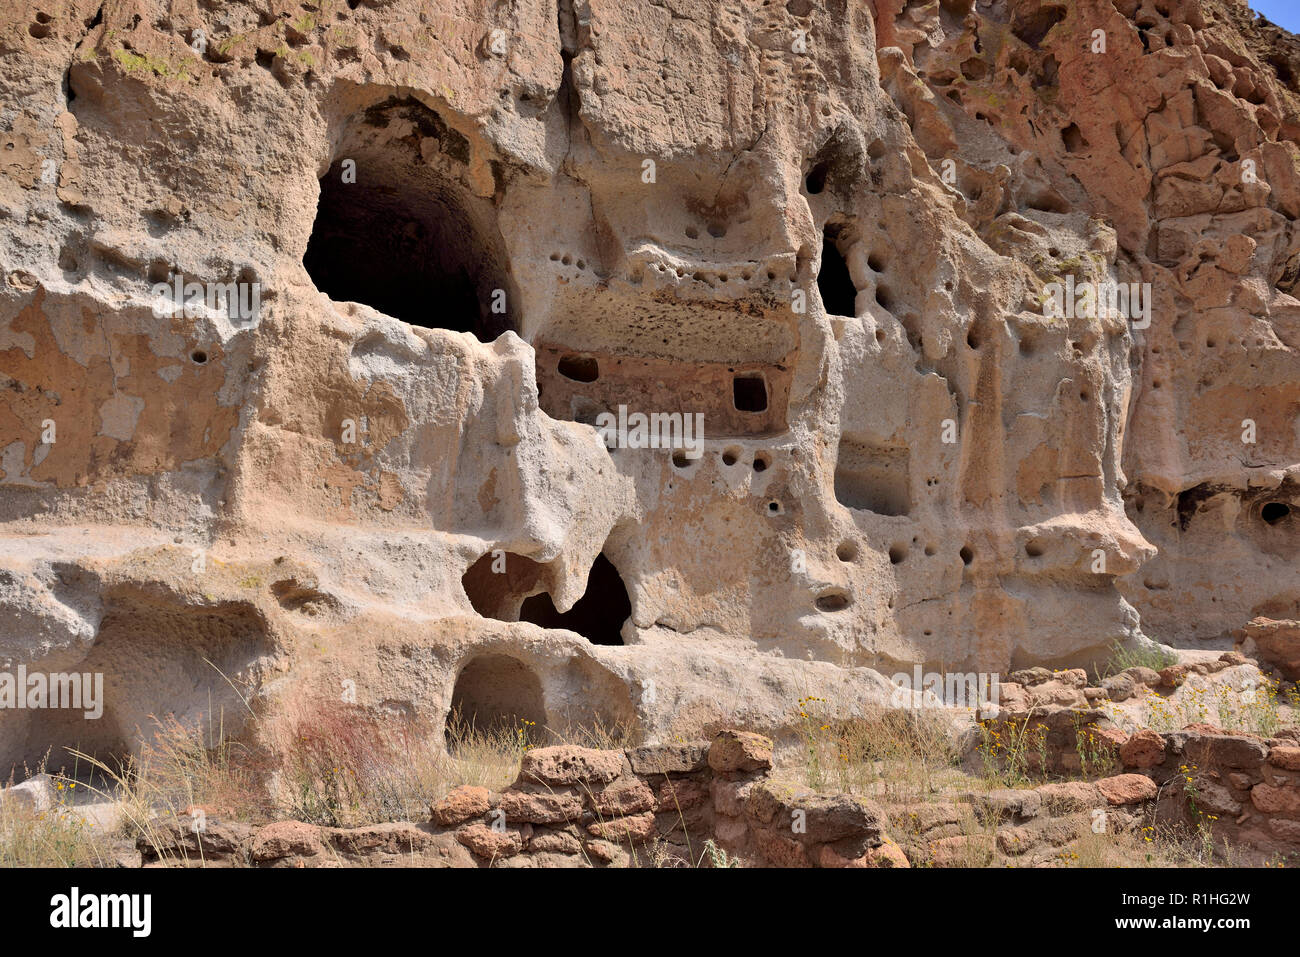 Second and third stories of a cliff dwelling with painted rooms, Frijoles Canyon, Pajarito Plateau, Bandelier National Monument, New Mexico 180924 694 Stock Photo